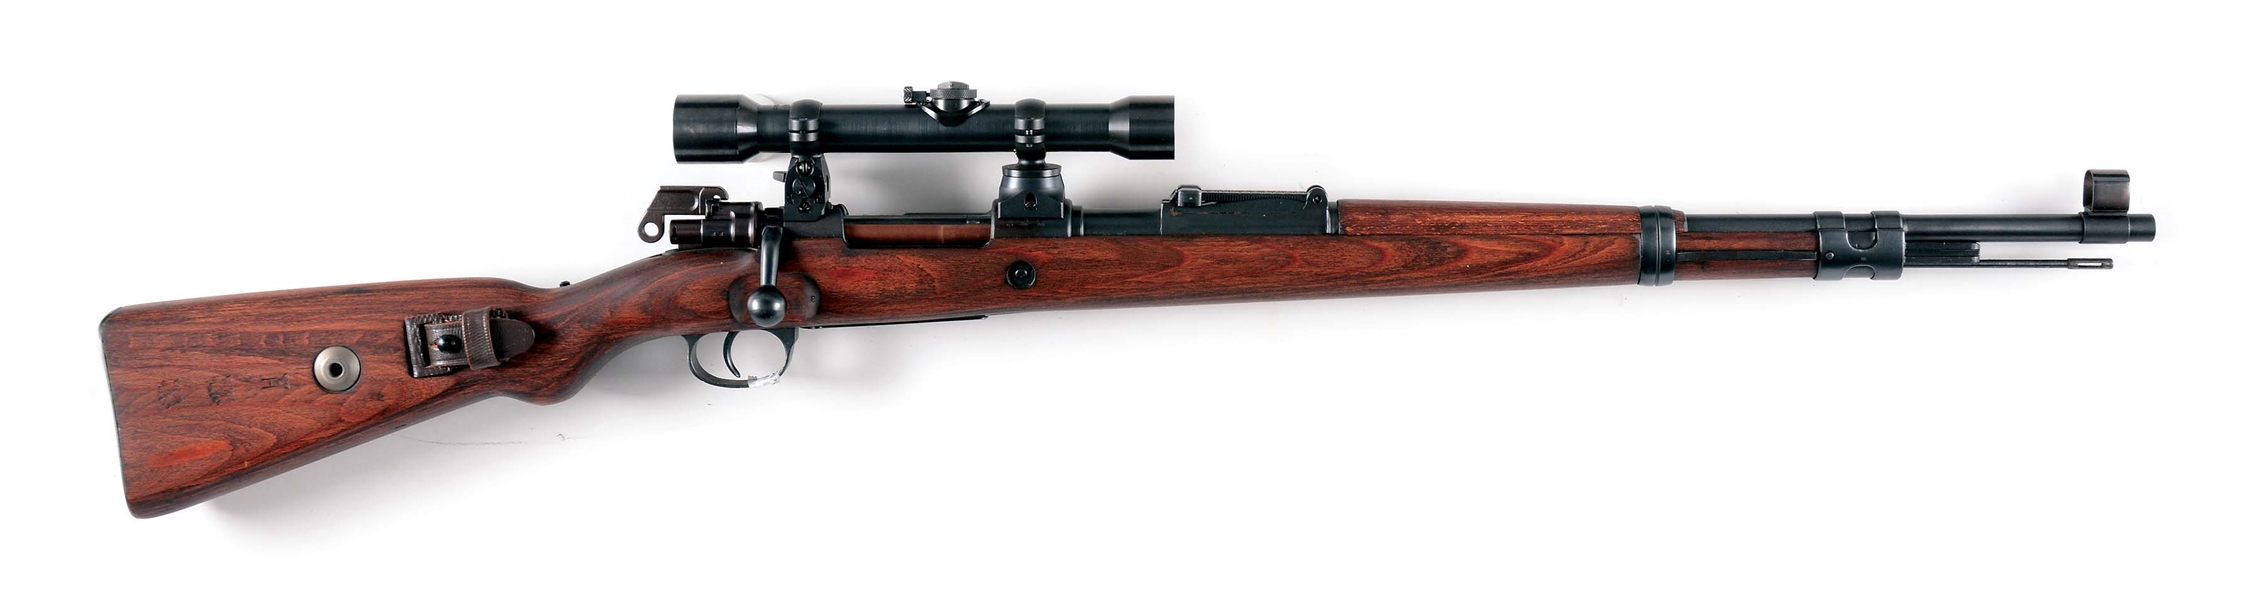 (C) RESTORED JAMES RIVER ARMORY "S/147" CODE 98K BOLT ACTION SNIPER RIFLE.